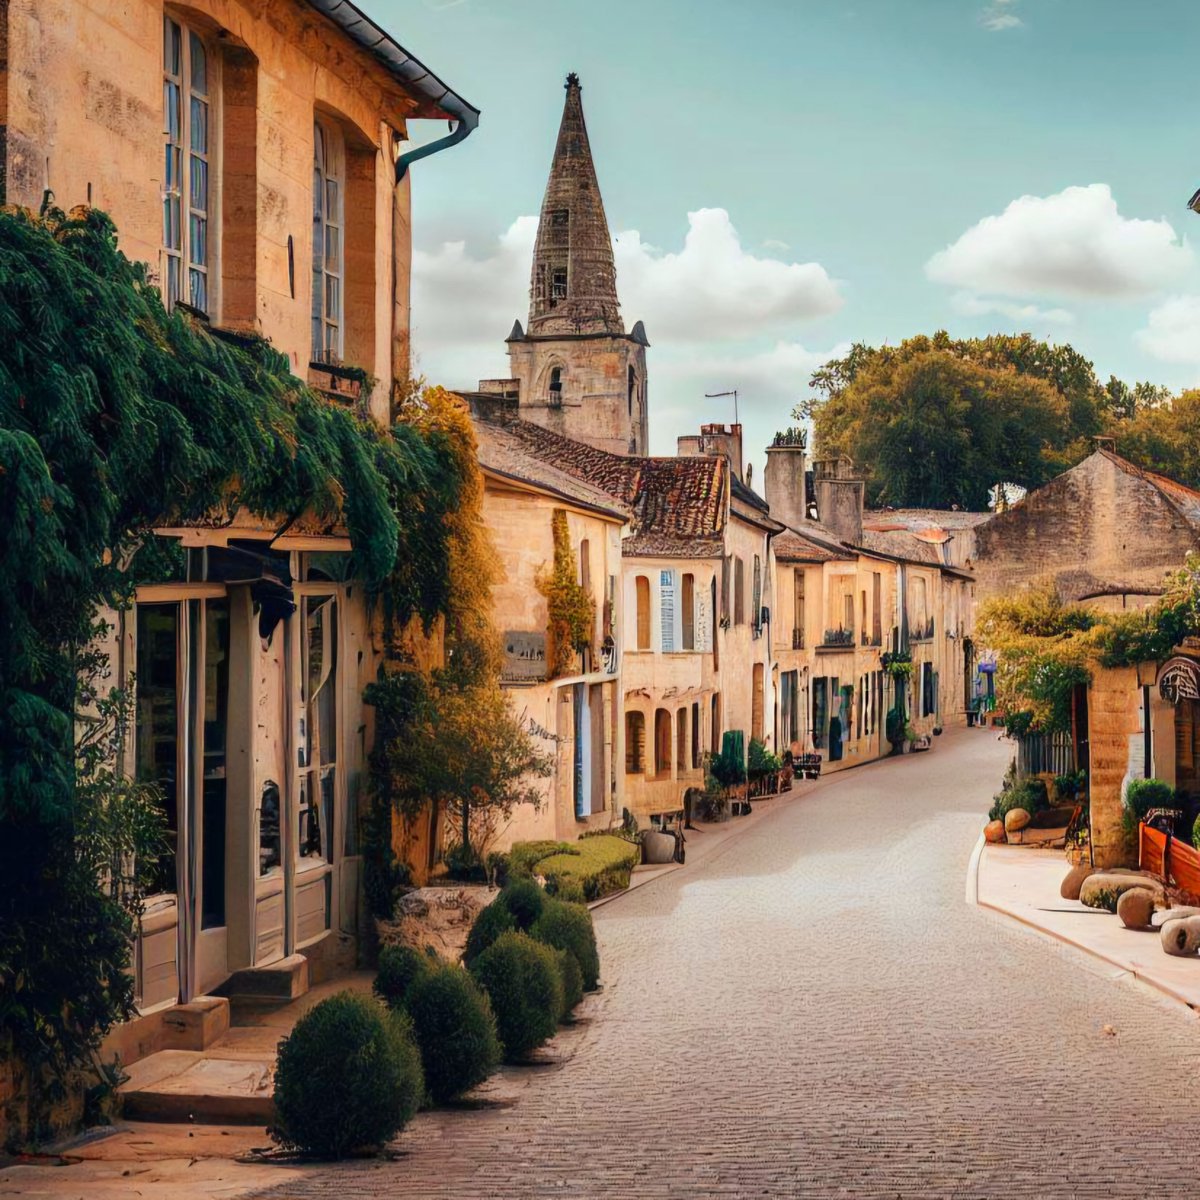 A street in the town of Saint Emilion 

#France 🇨🇵 #travel our #PhotoofTheDay buff.ly/3xMwBCY